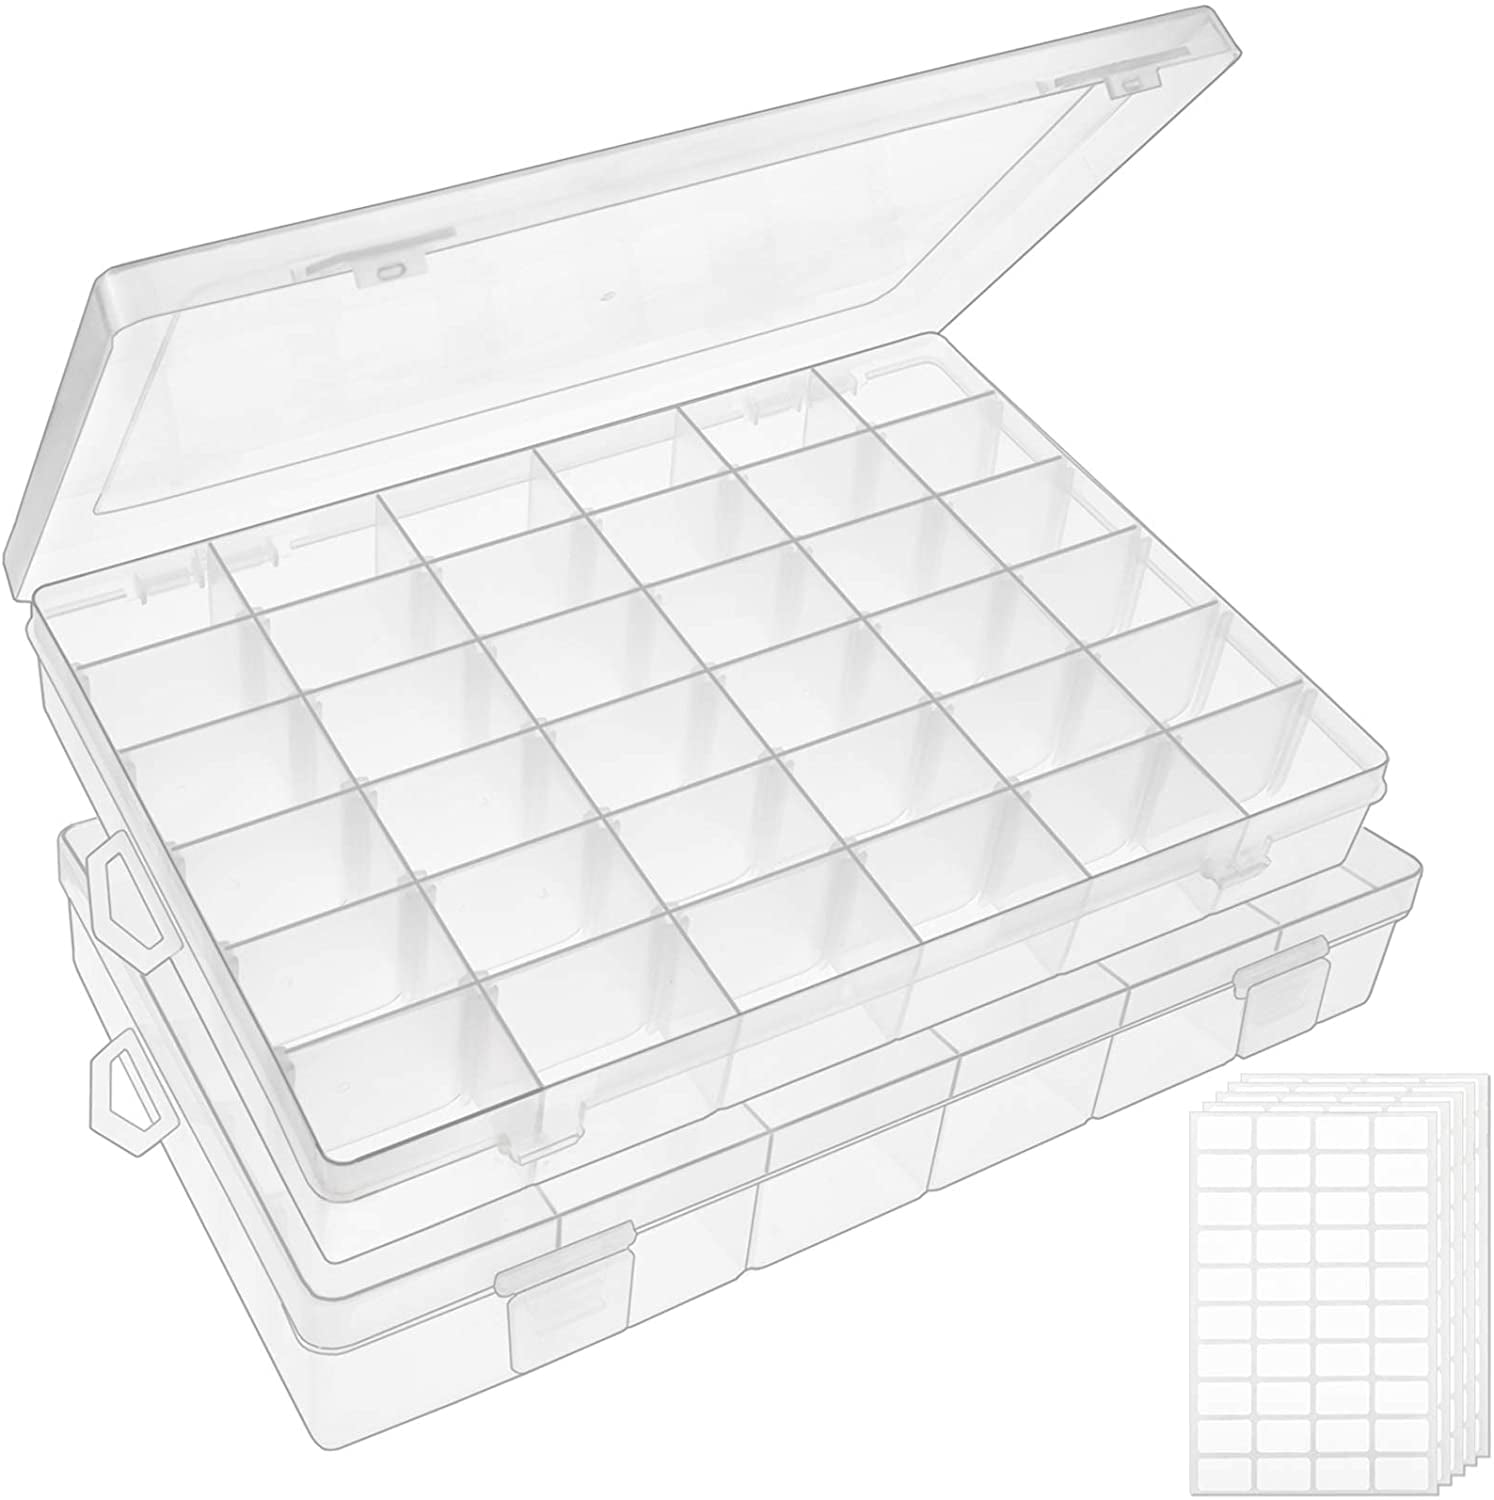 36 Compartments Clear Plastic Jewelry Storage Box Bead Organizer Container Grace 